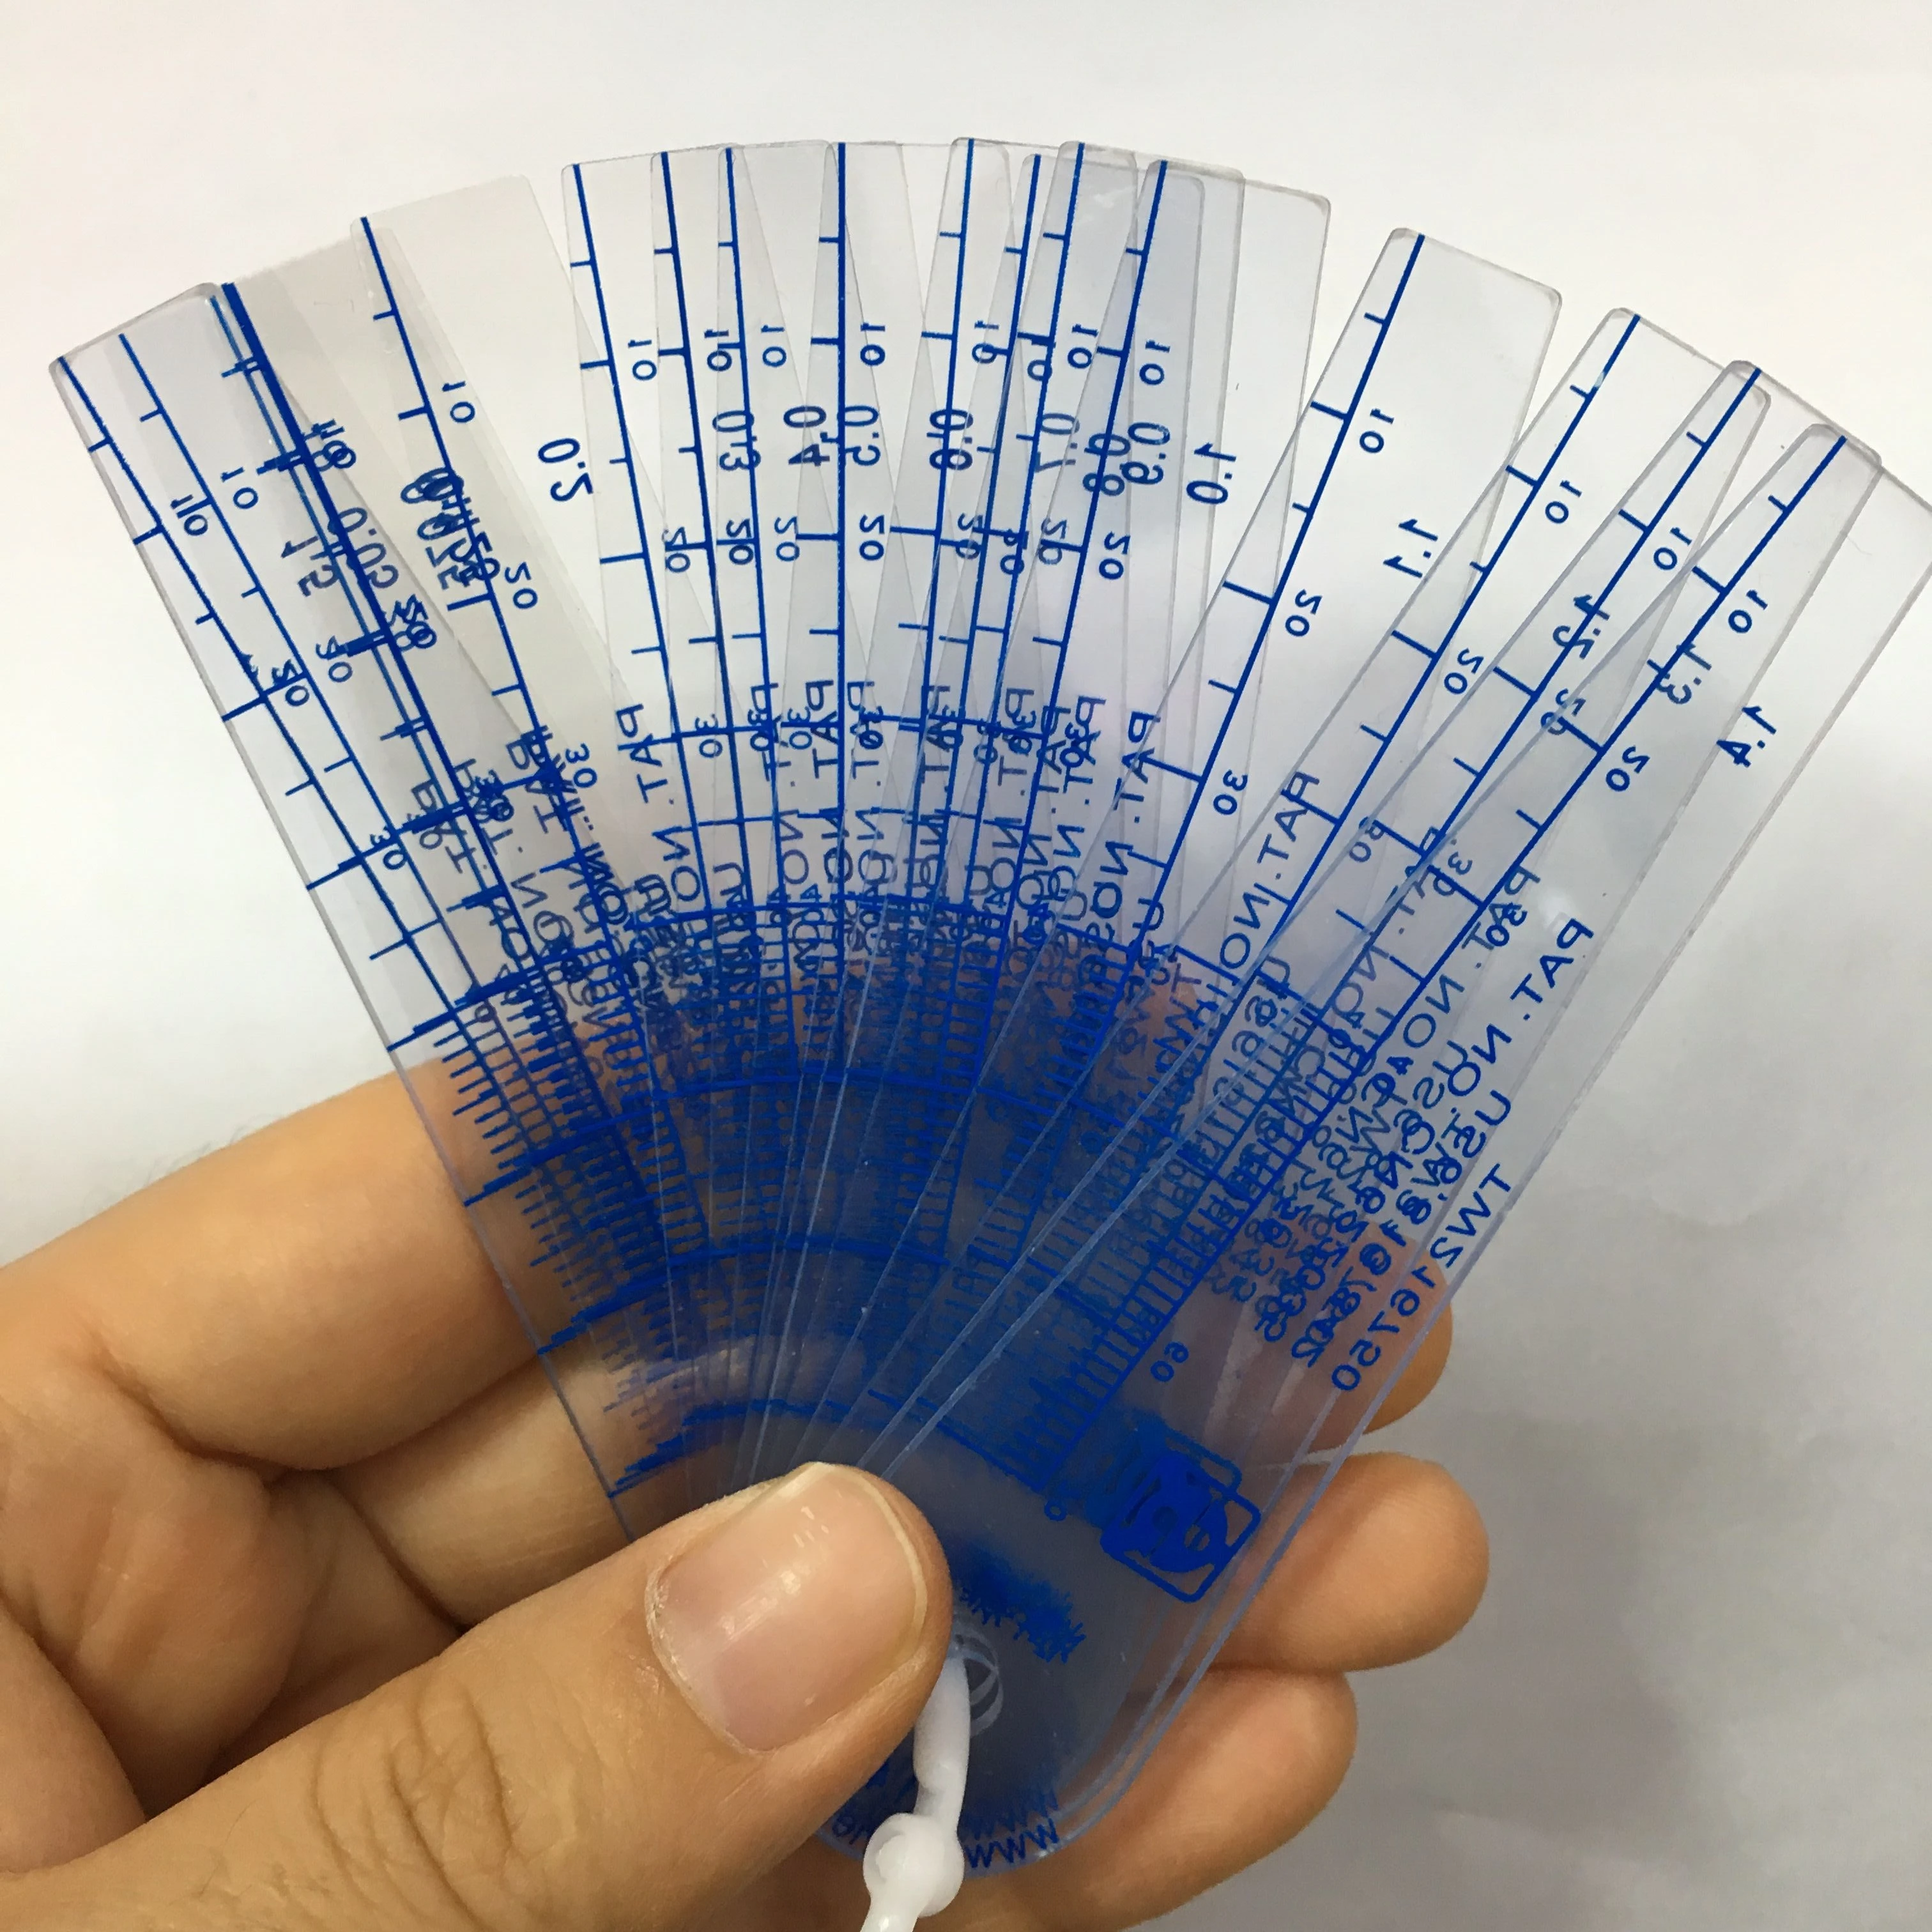 

Thickness Gauge Plastic Feeler Gauge Mold Testing And Measurement Filler Gauge 0.05 to 1.0 mm 13 pieces, Blue and transparent